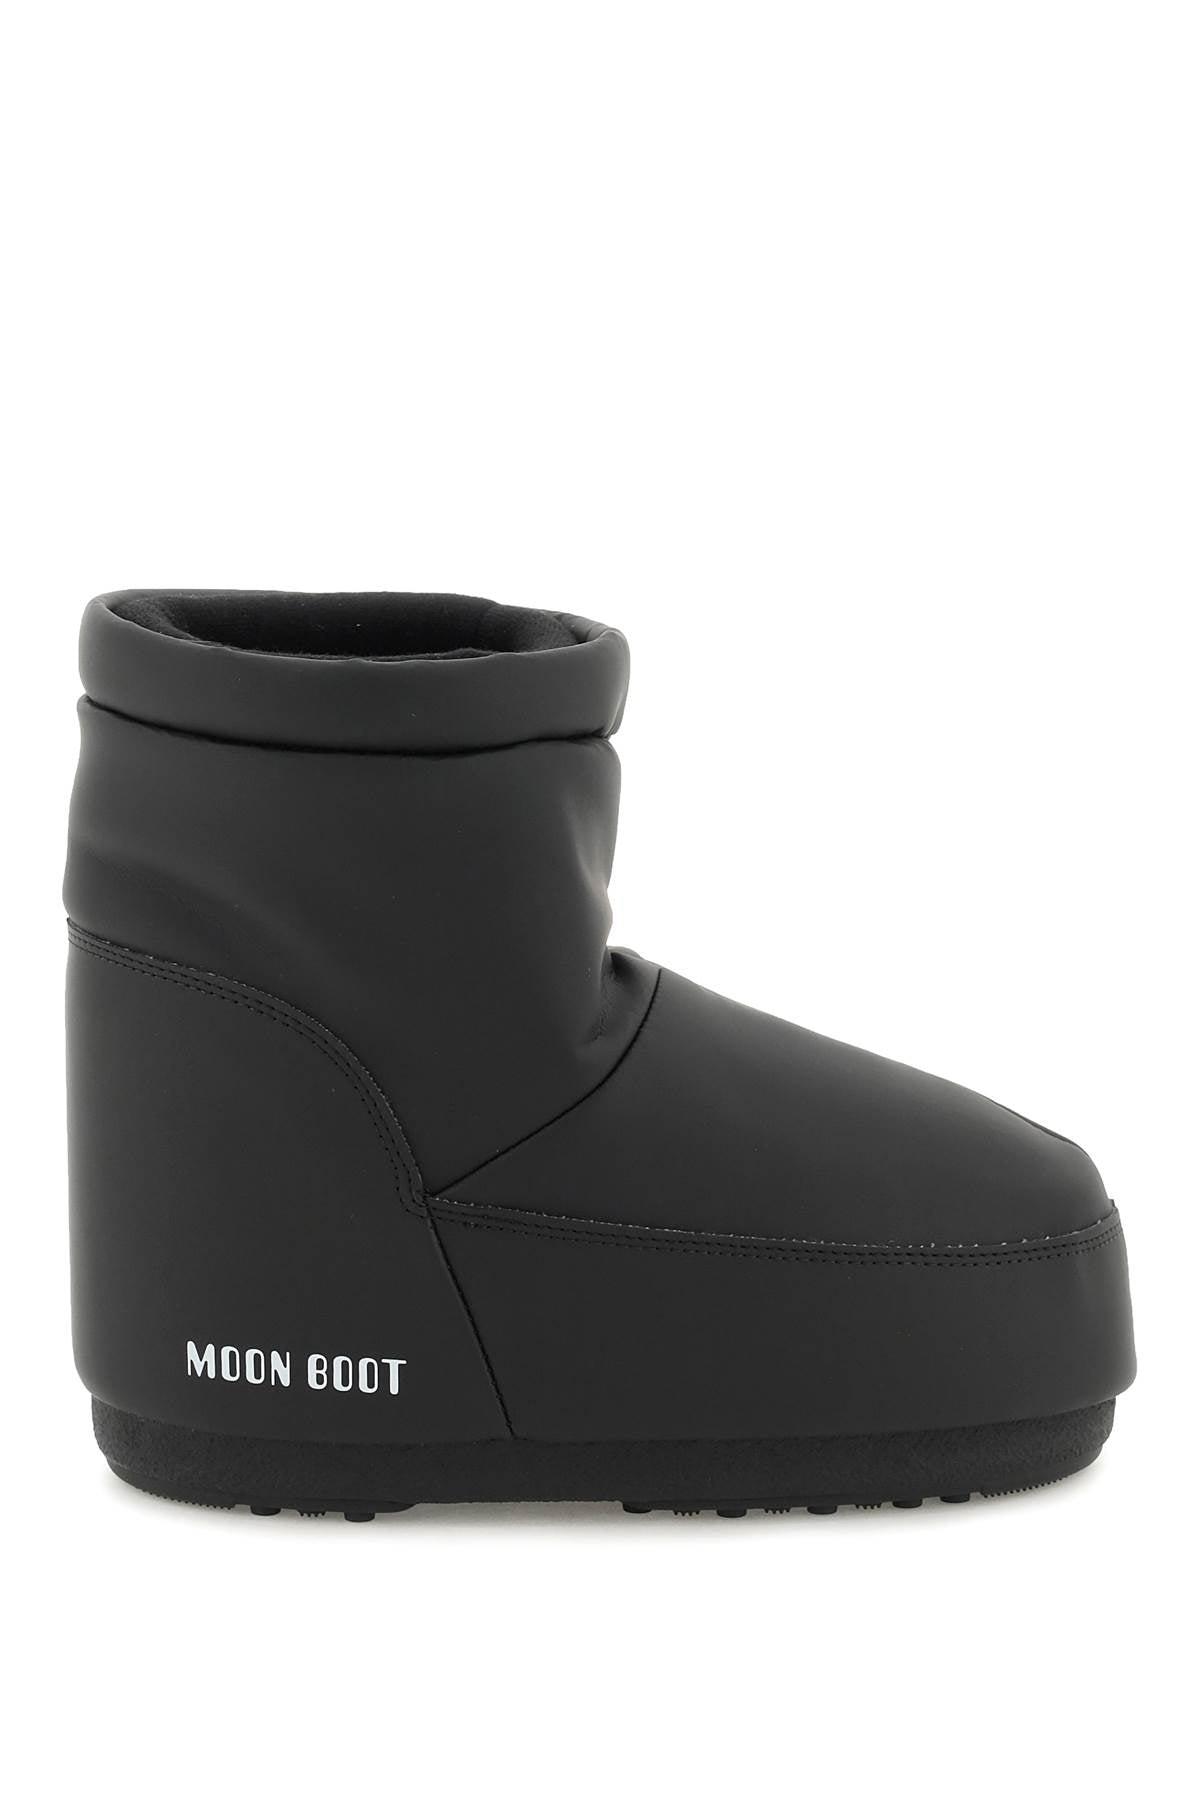 ICON LOW BLACK RUBBER BOOTS